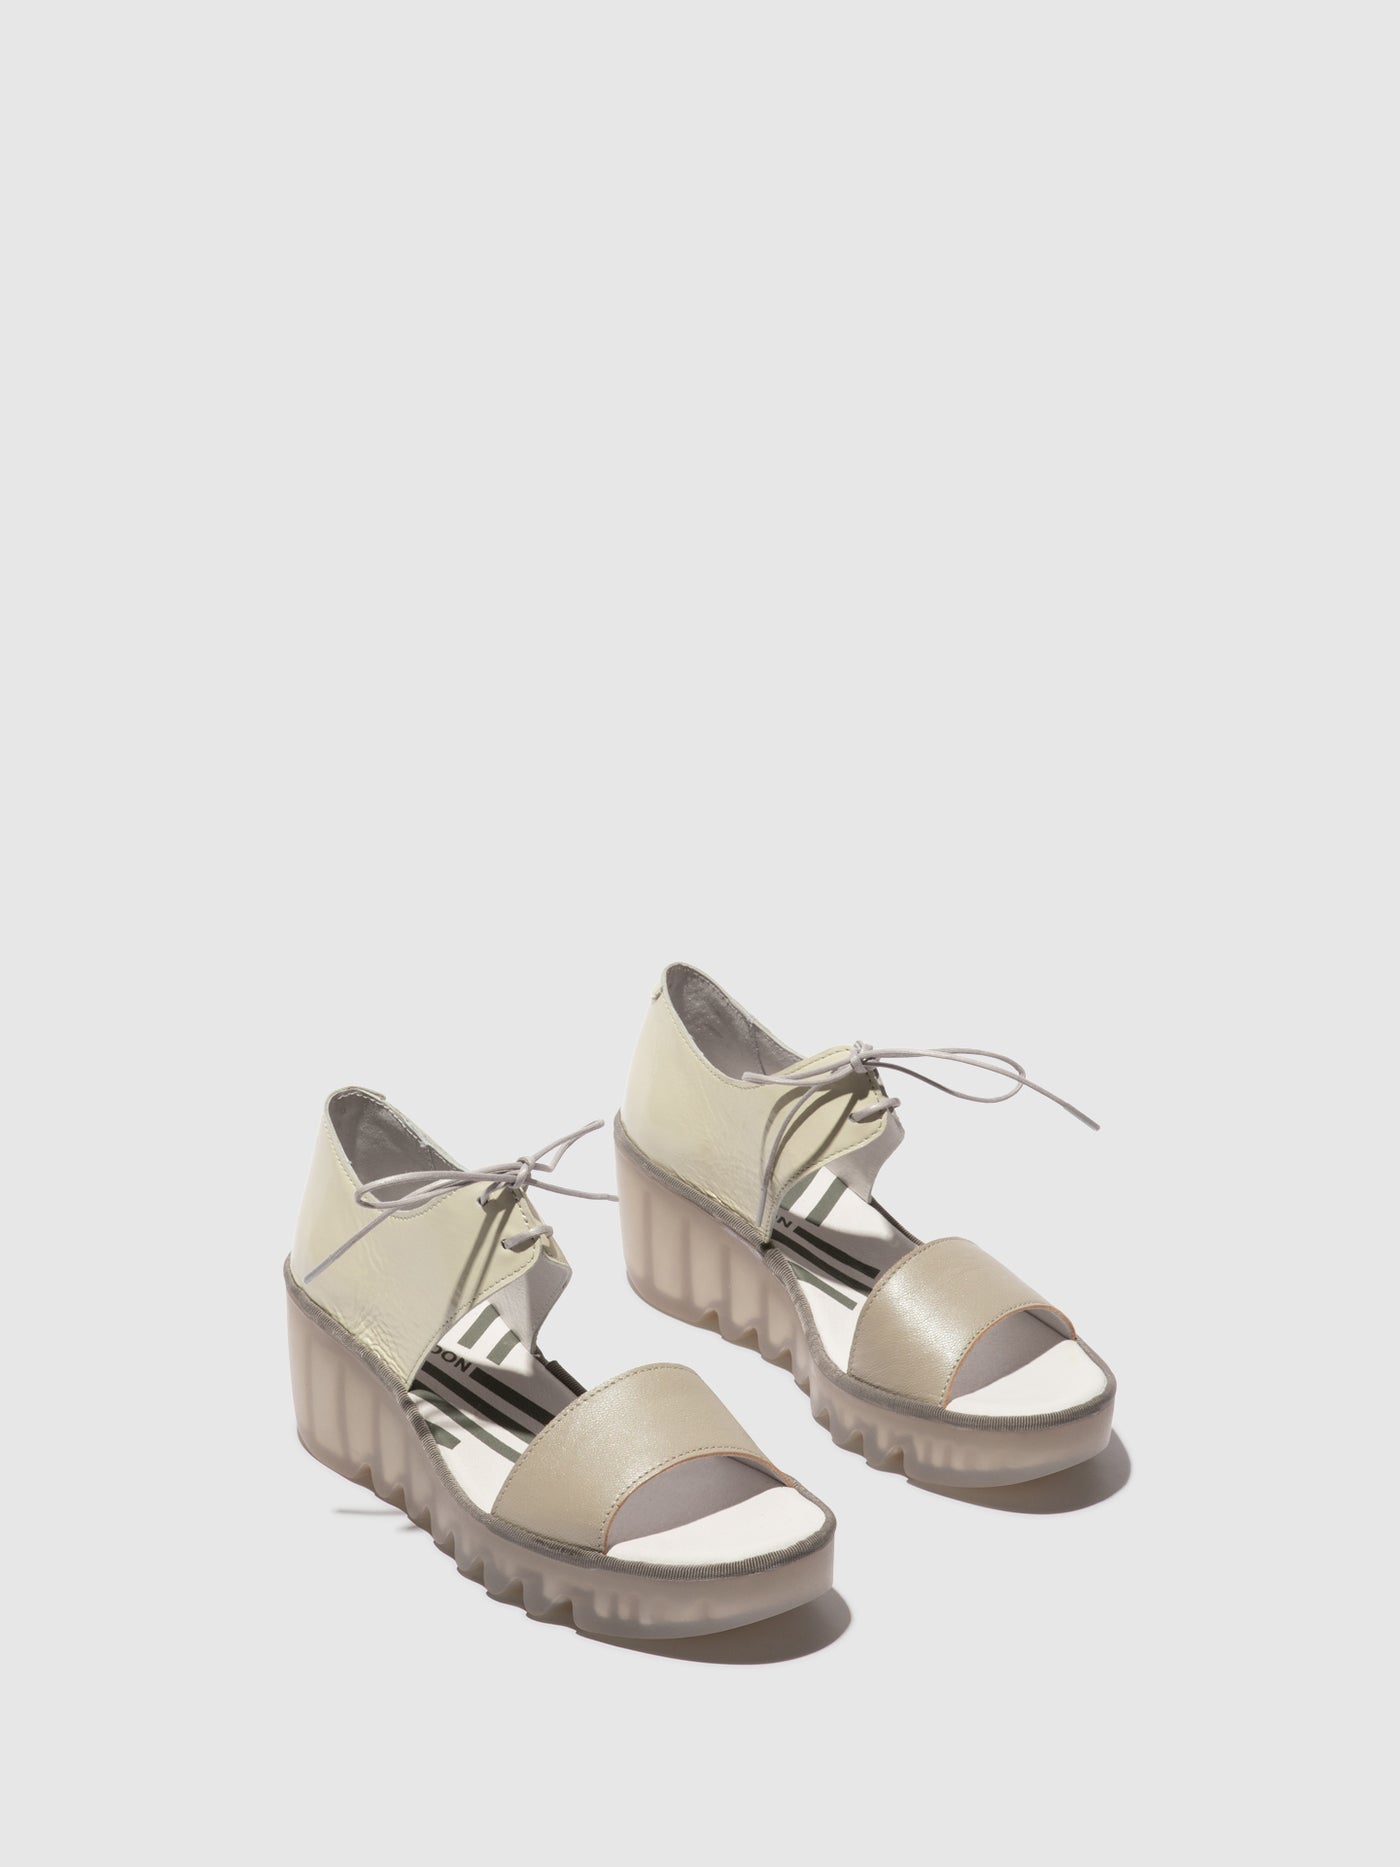 Lace-up Sandals BILU465FLY SILVER/OFFWHITE